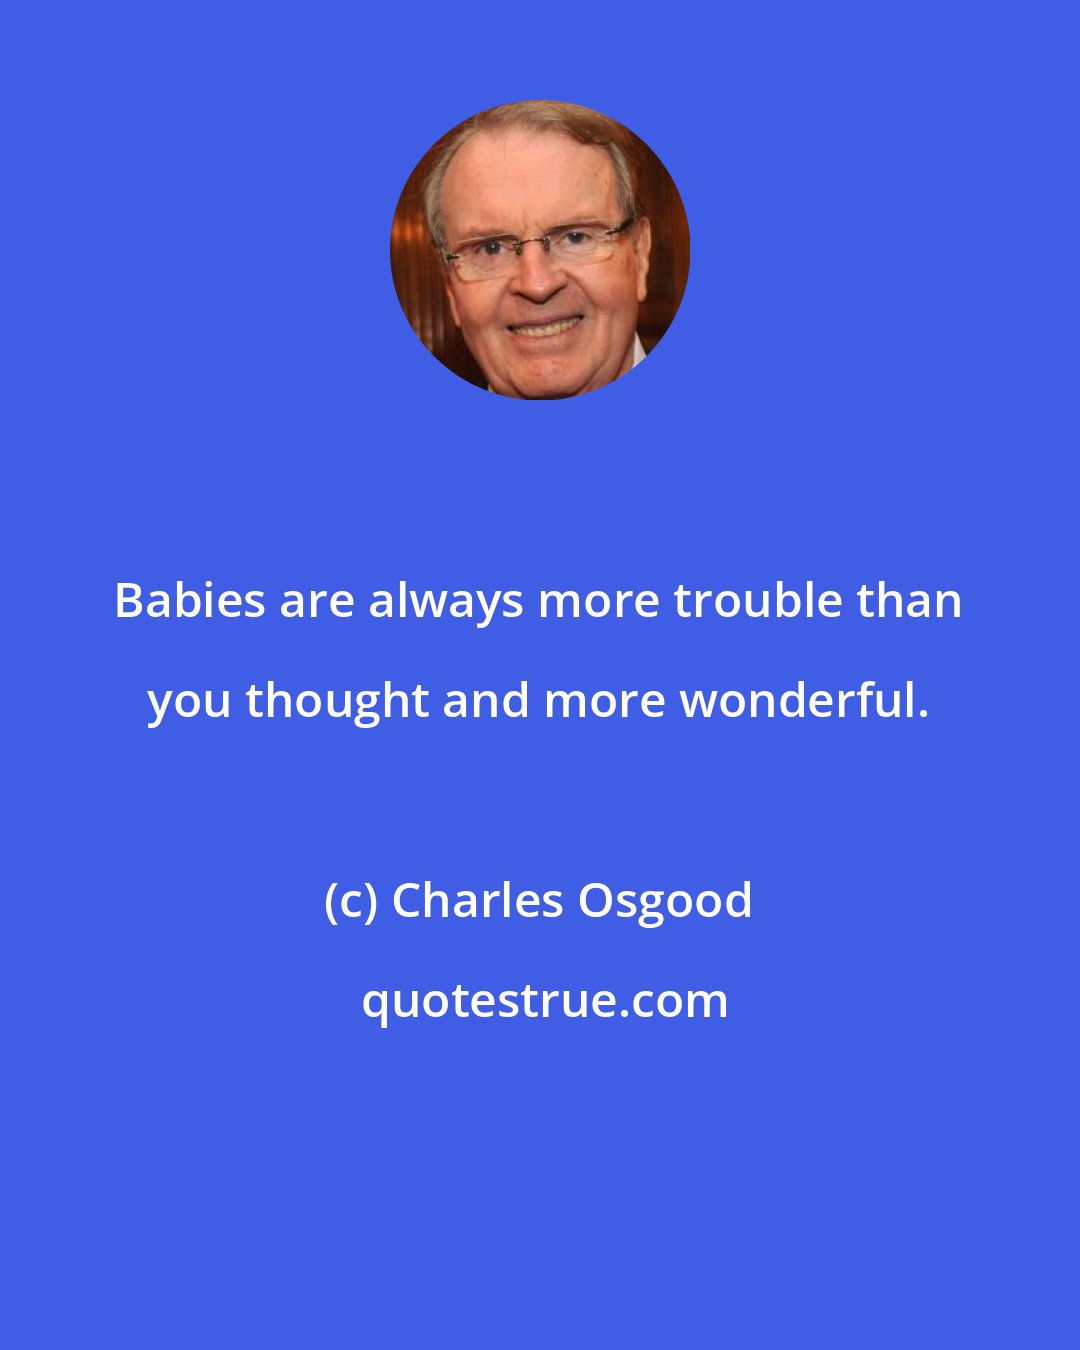 Charles Osgood: Babies are always more trouble than you thought and more wonderful.